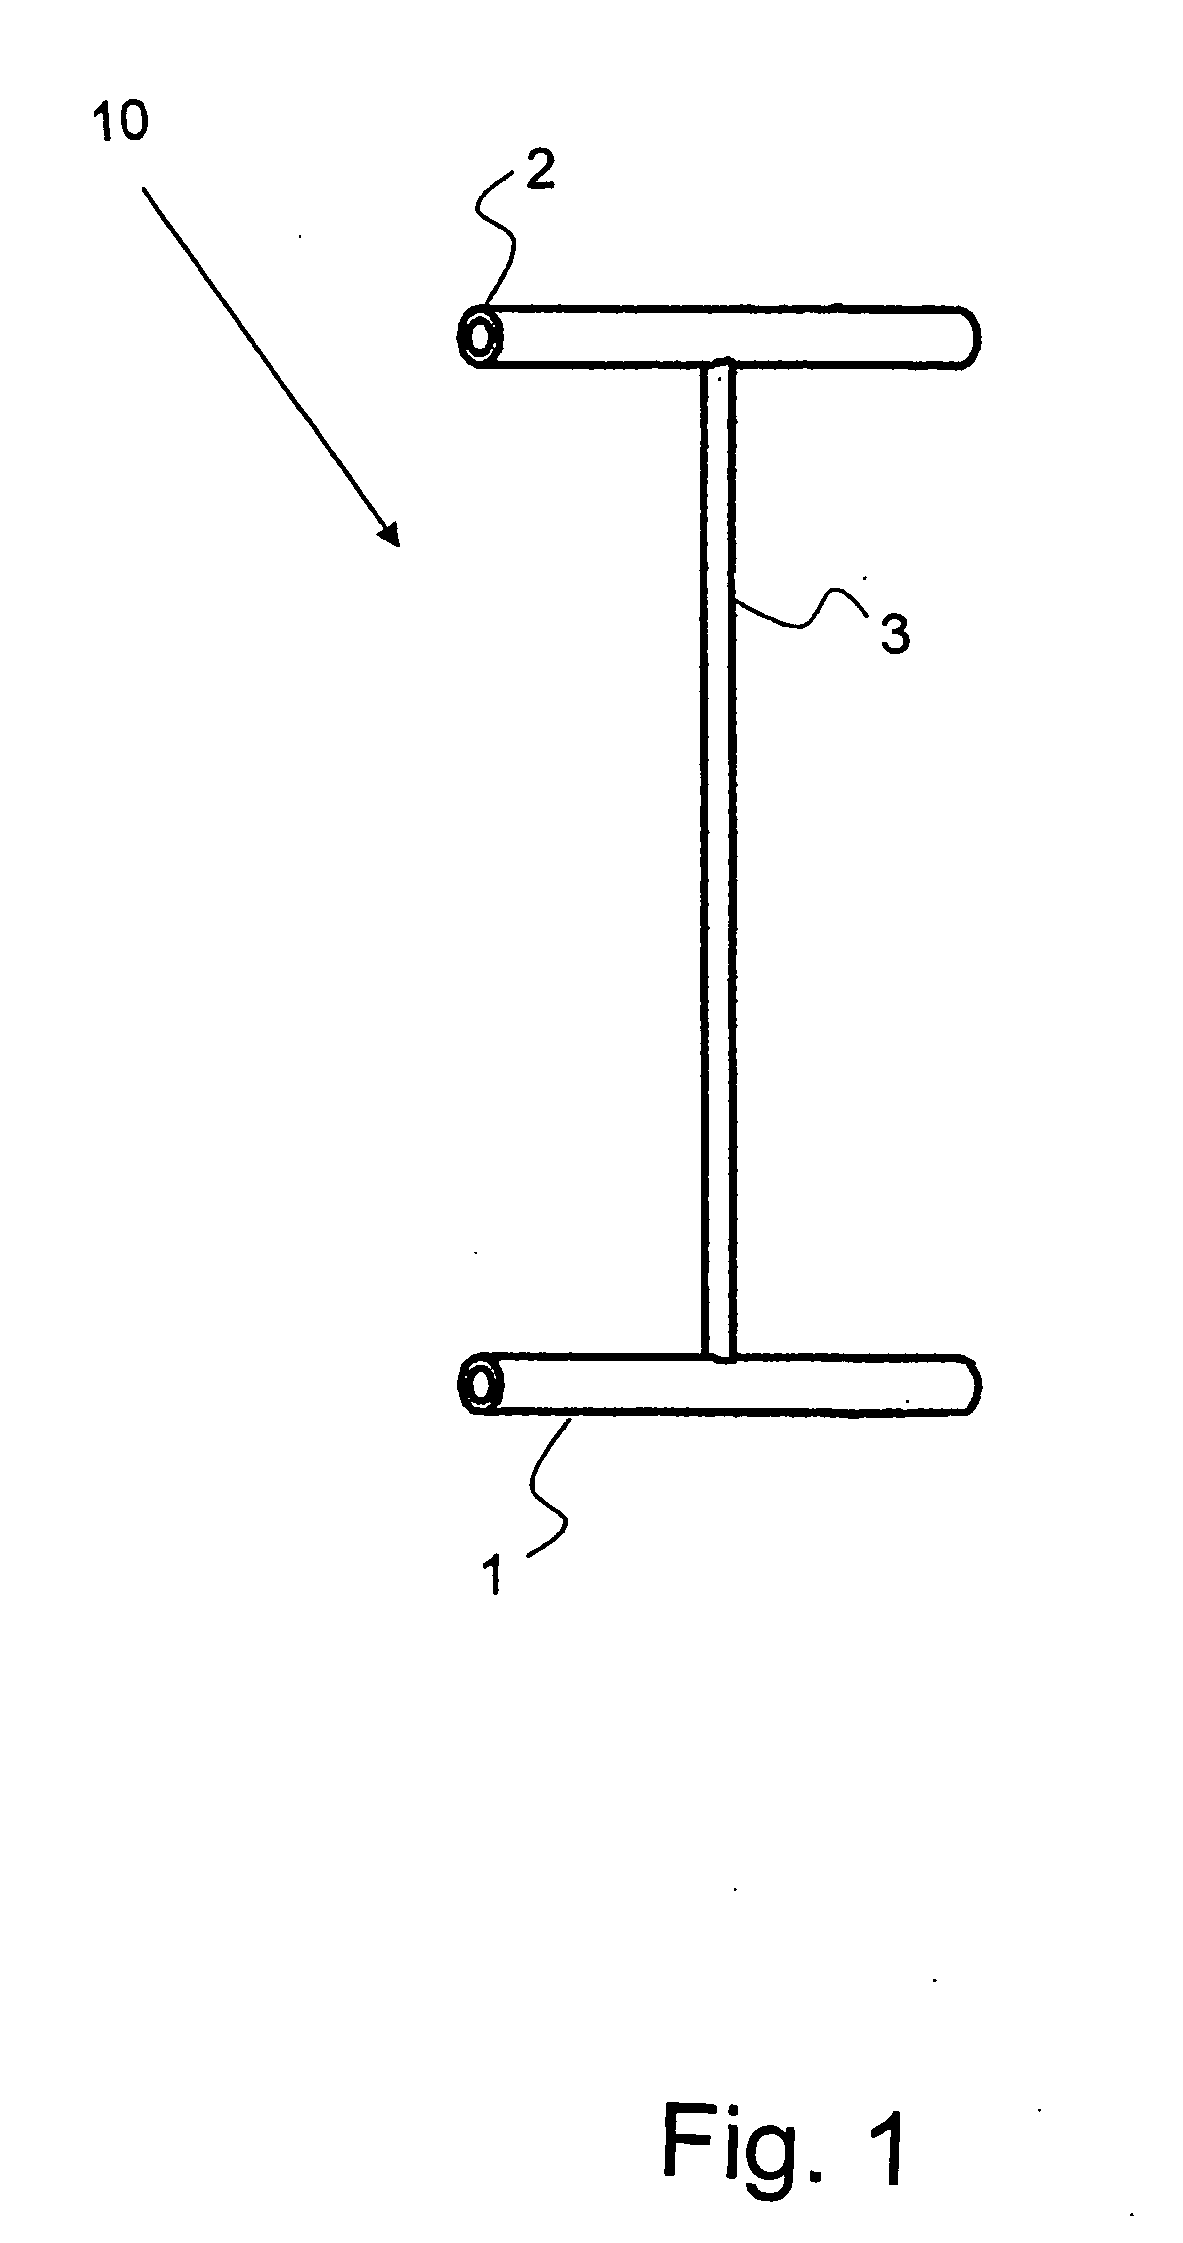 Article, system, and method for securing medical device to tissue or organ